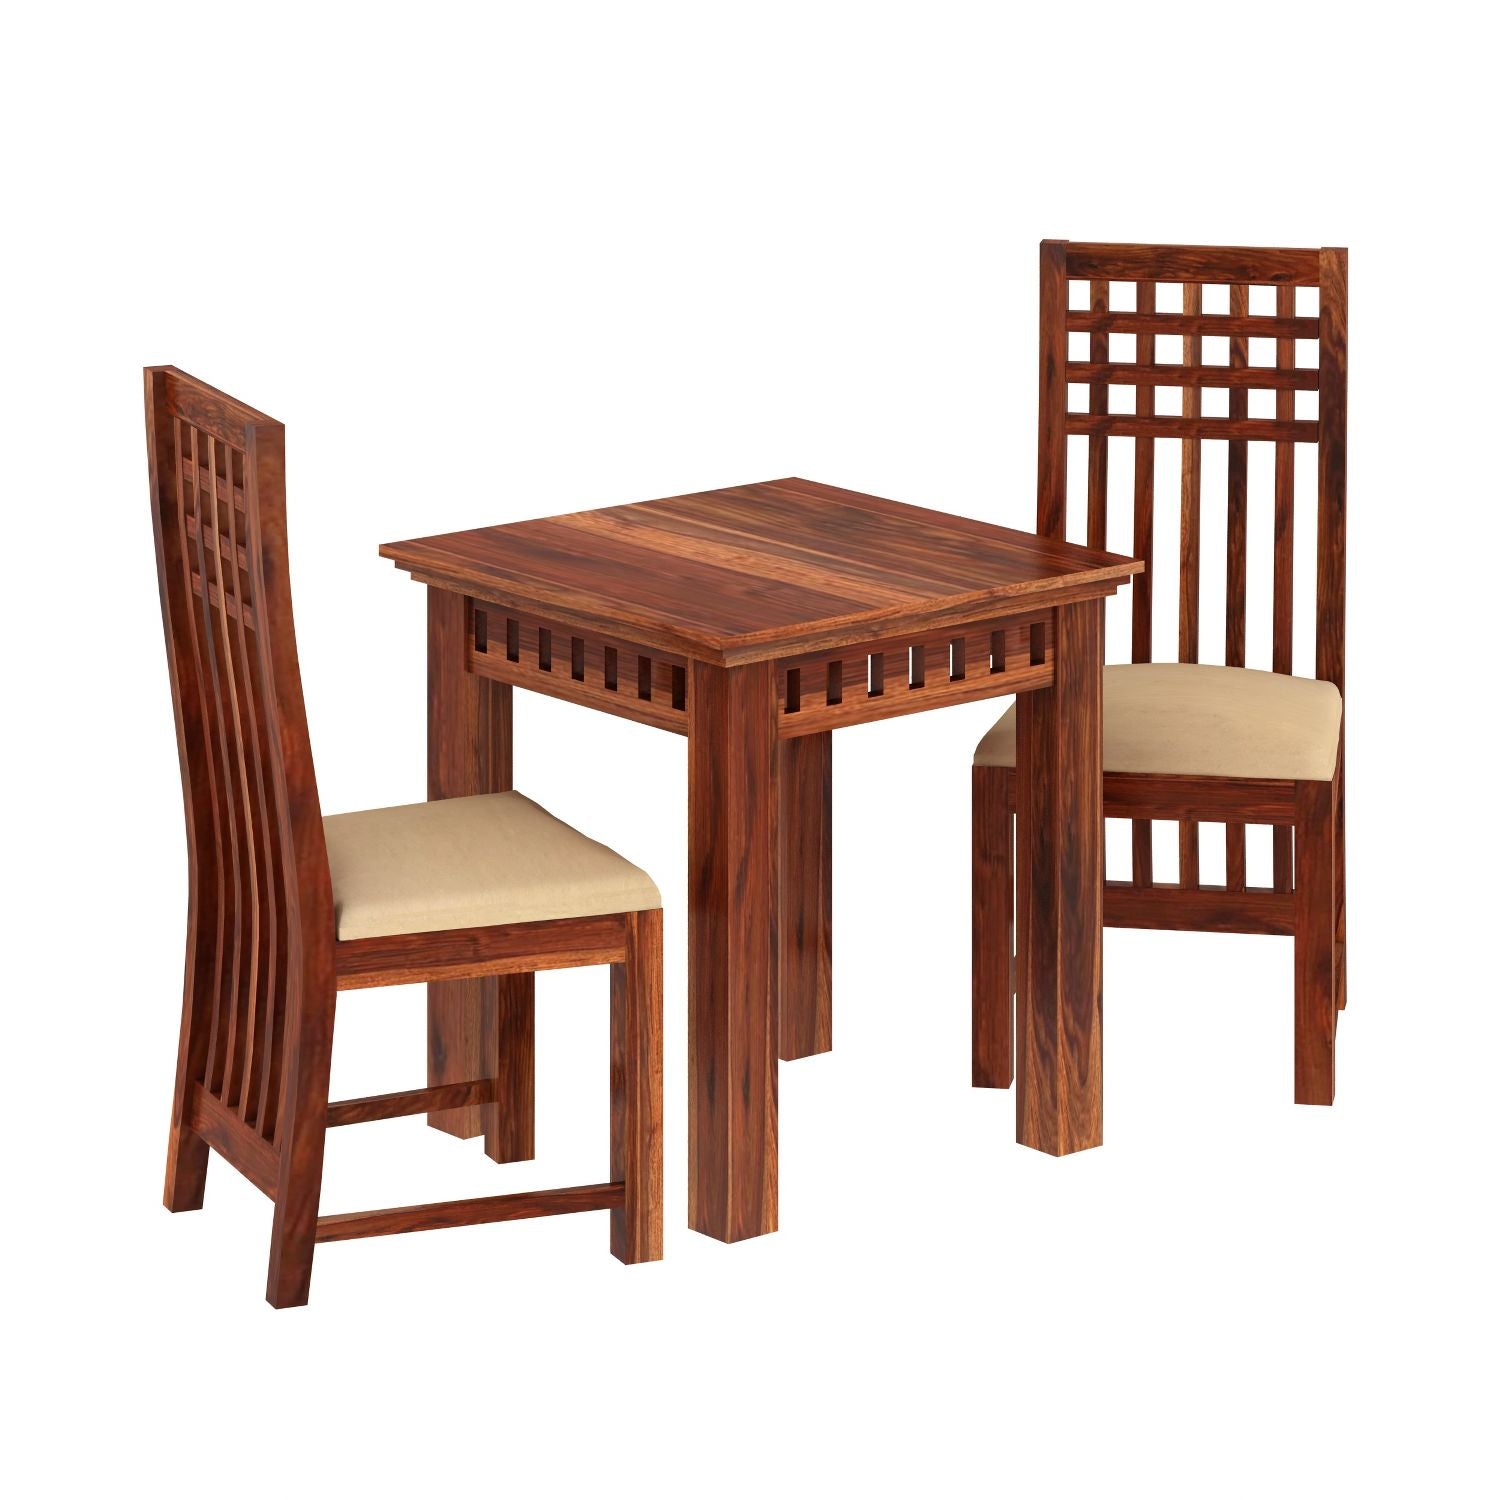 Amer Solid Sheesham Wood 2 Seater Dining Set (With Cushion, Natural Finish)